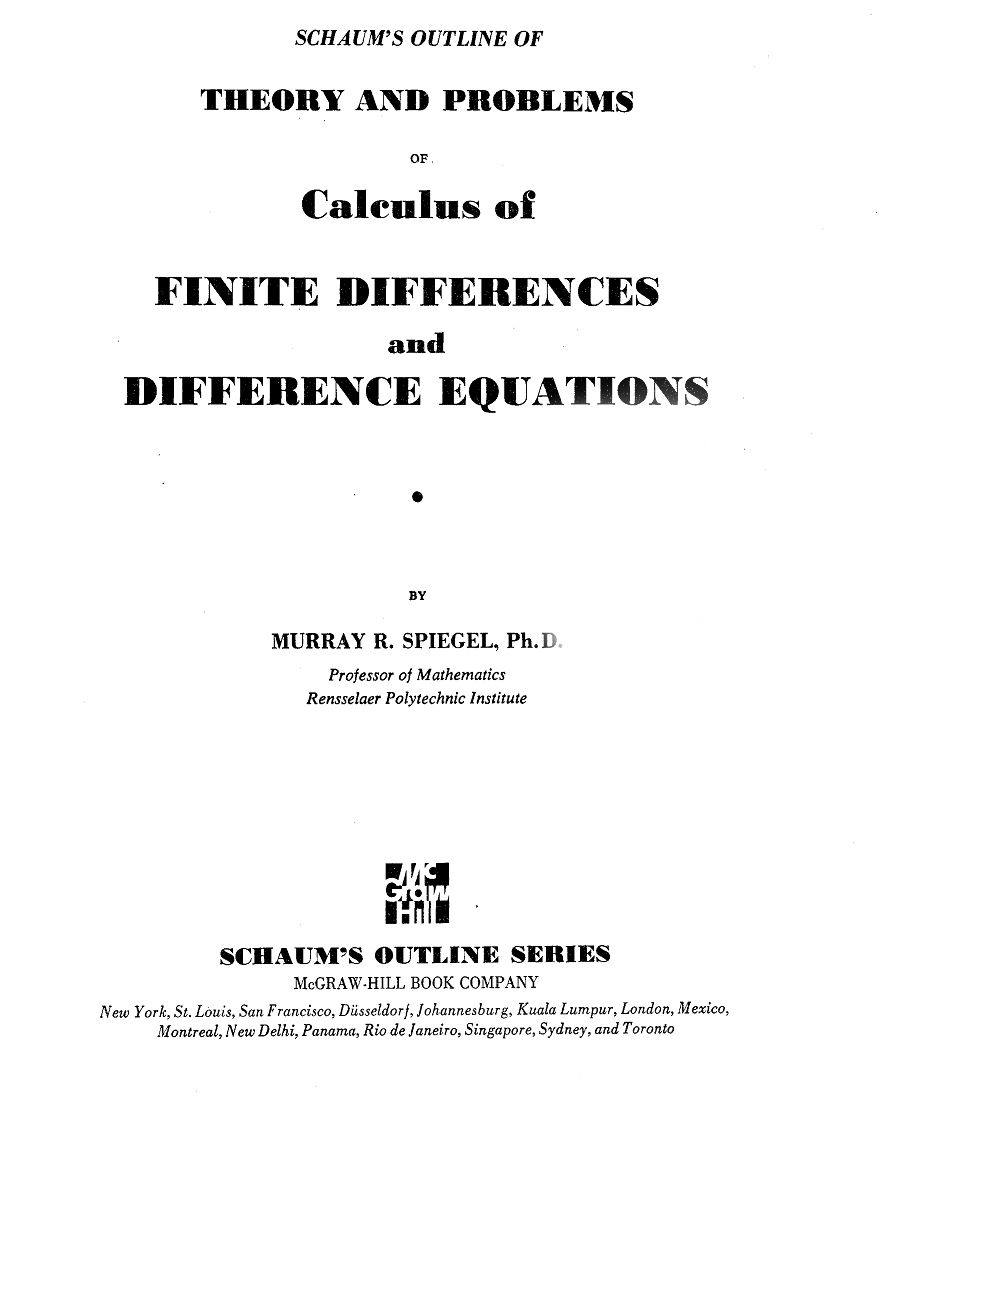 Schaum's Outline of  Theory and Problems of Calculus of Finite Difference and Difference Equations by Murray R. Spieel, Ph PDF Free Download